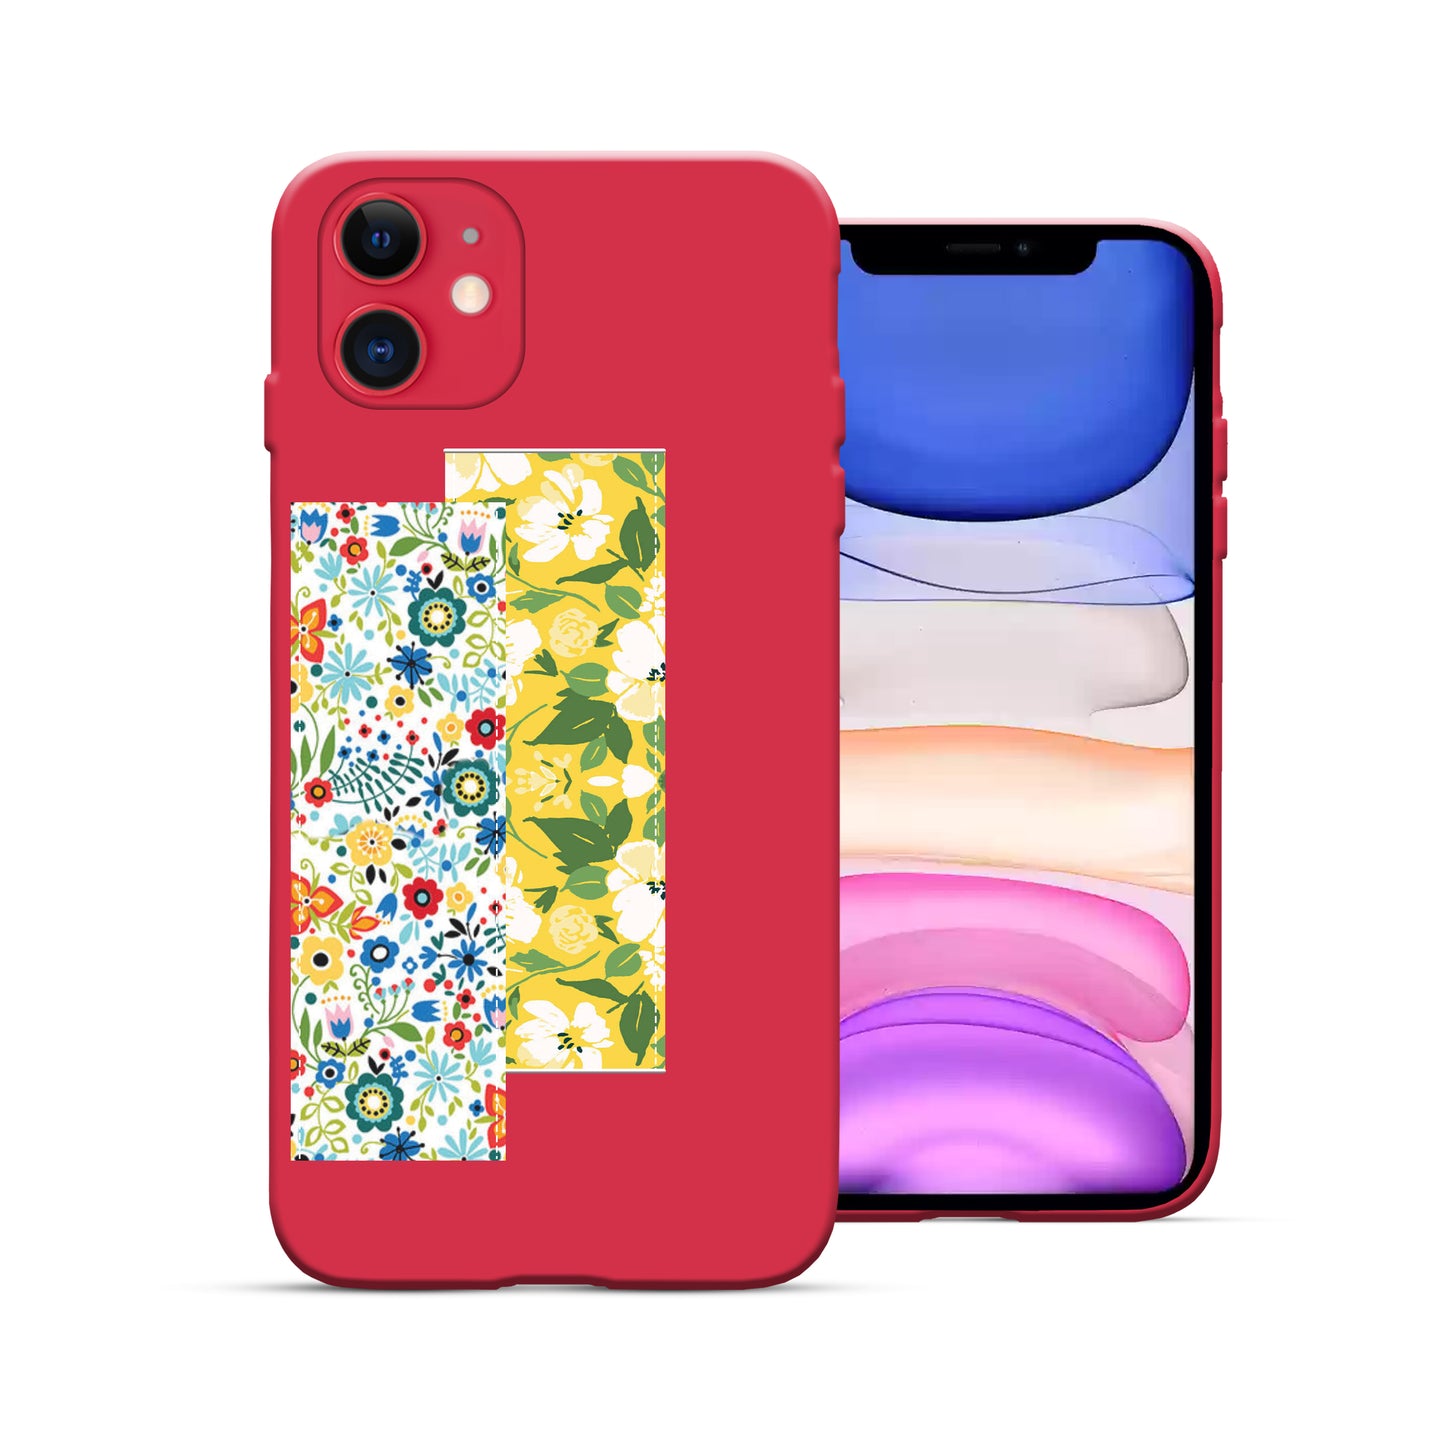 Finger Loop Phone Case For iPhone 11 White With Leopard & Pink Tie Dye Strap